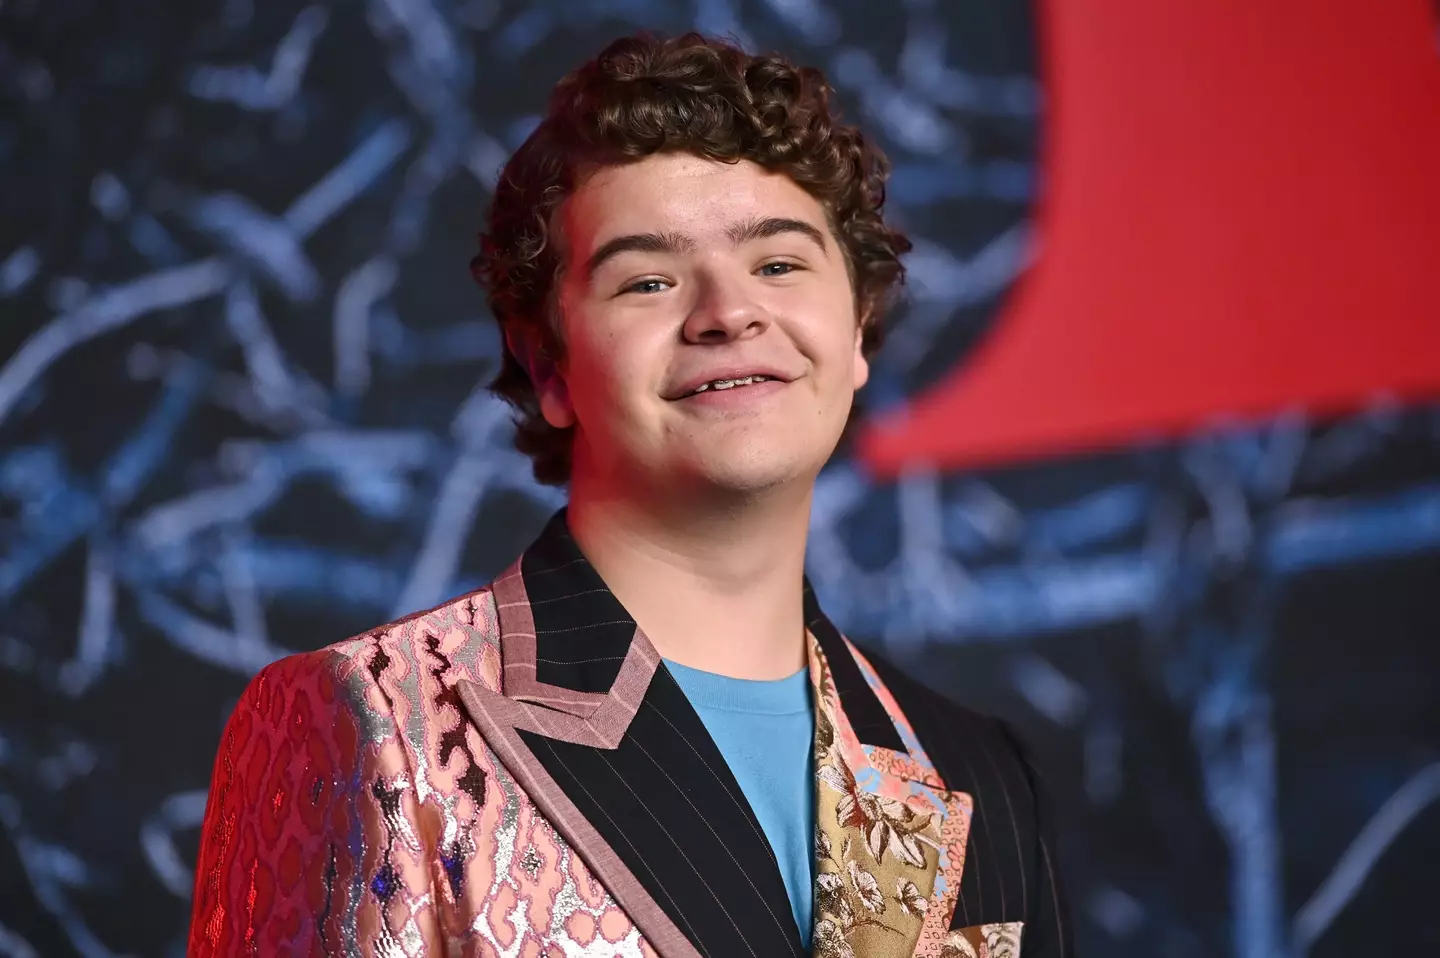 It turns out that Gaten Matarazzo is just as good at singing as he is acting!